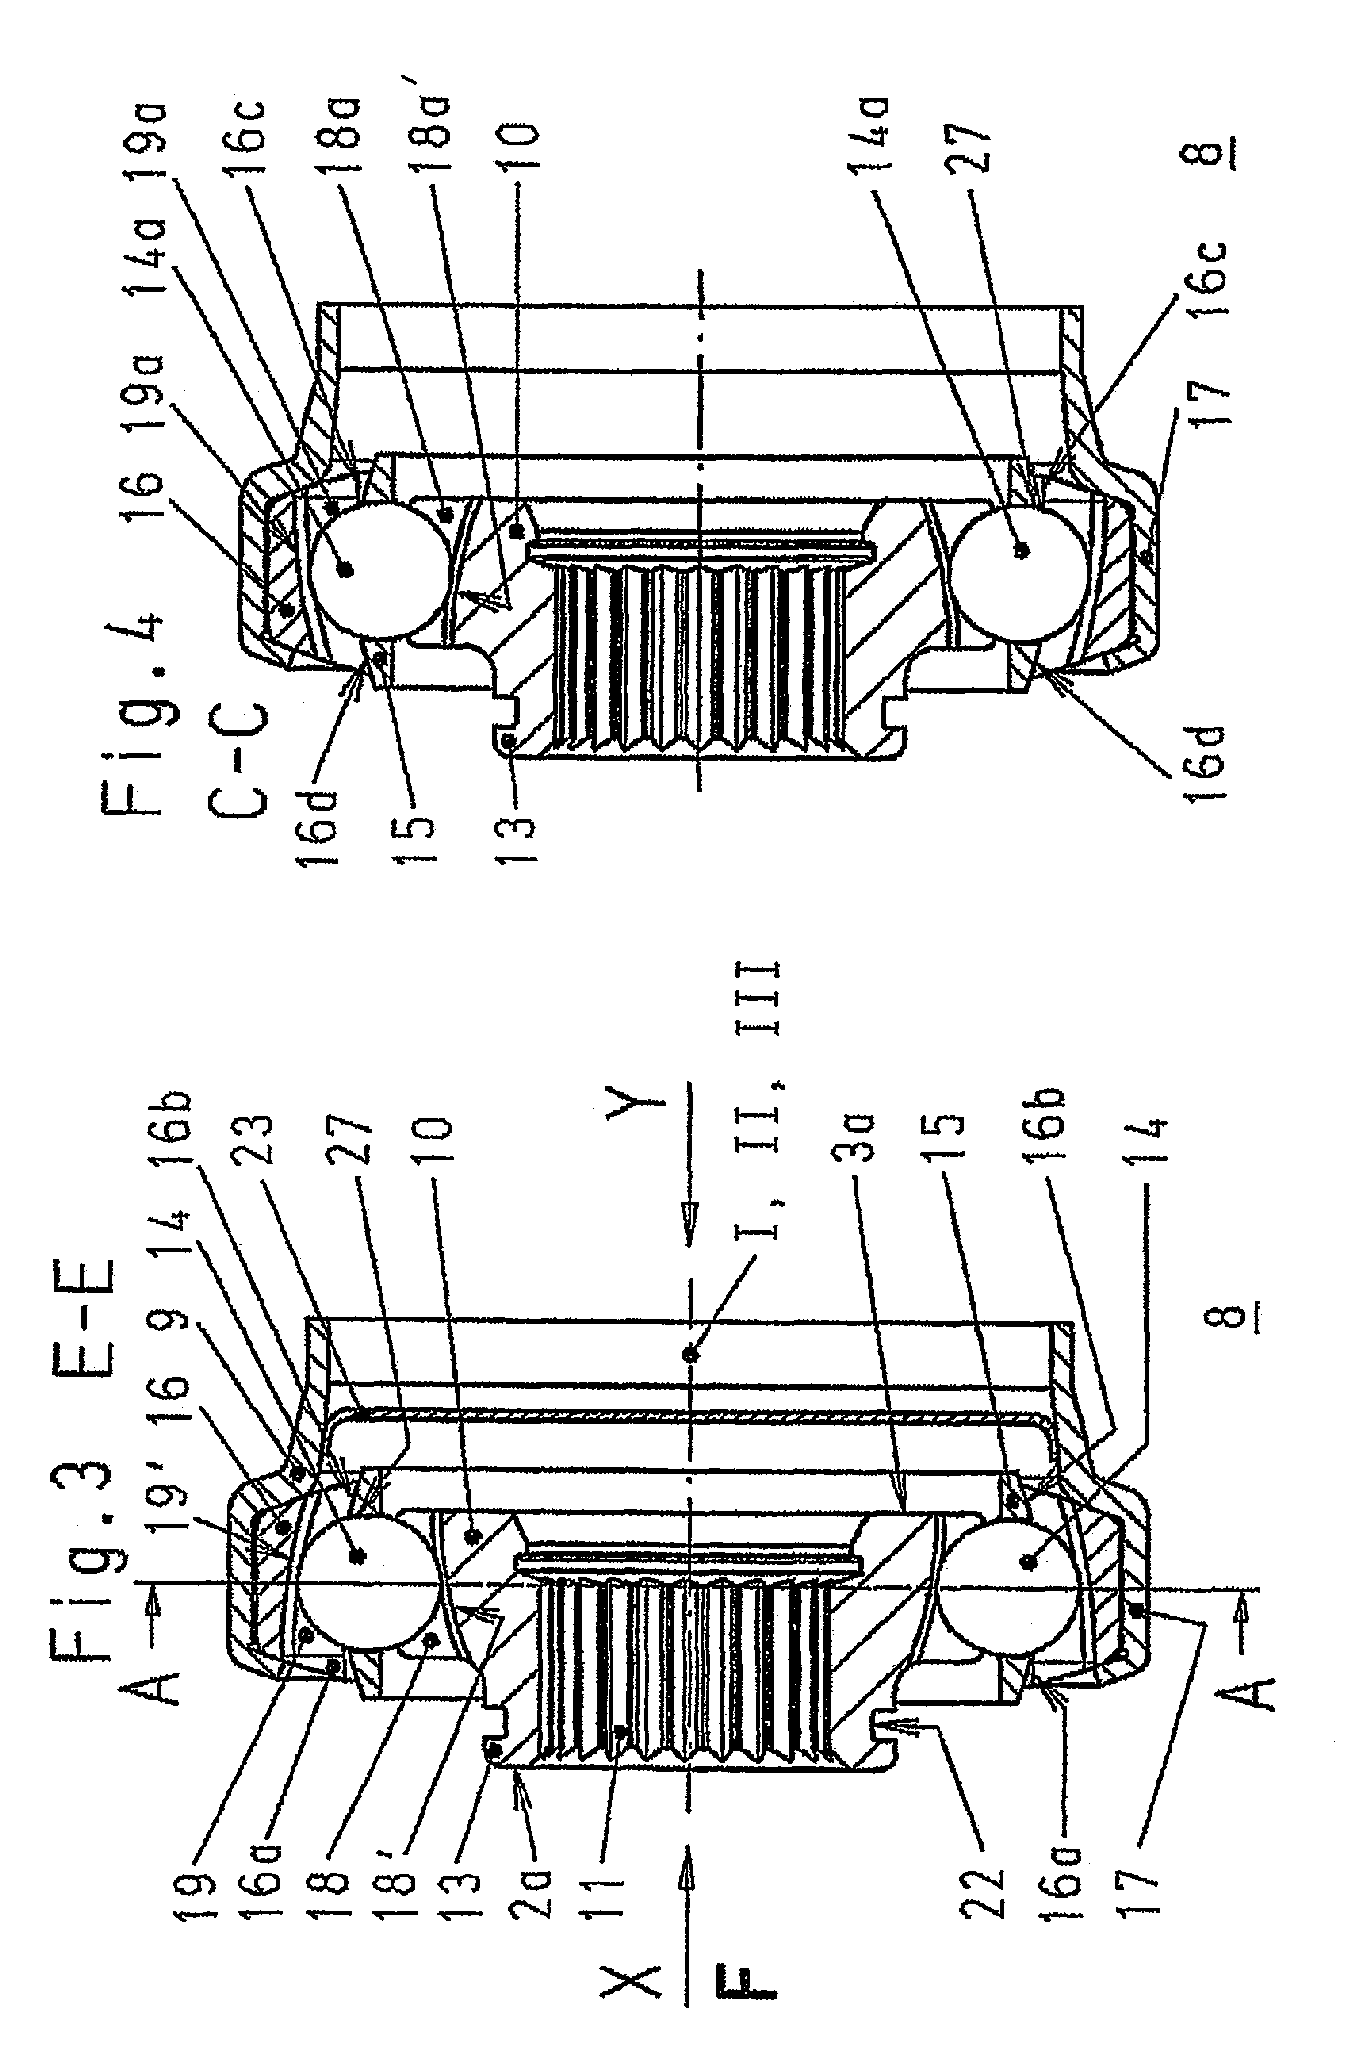 Torque Transmission Device Useful as a Fixed Constant Velocity Ball Joint Constructed as an Opposed Track Joint and Method for Producing Such a Joint